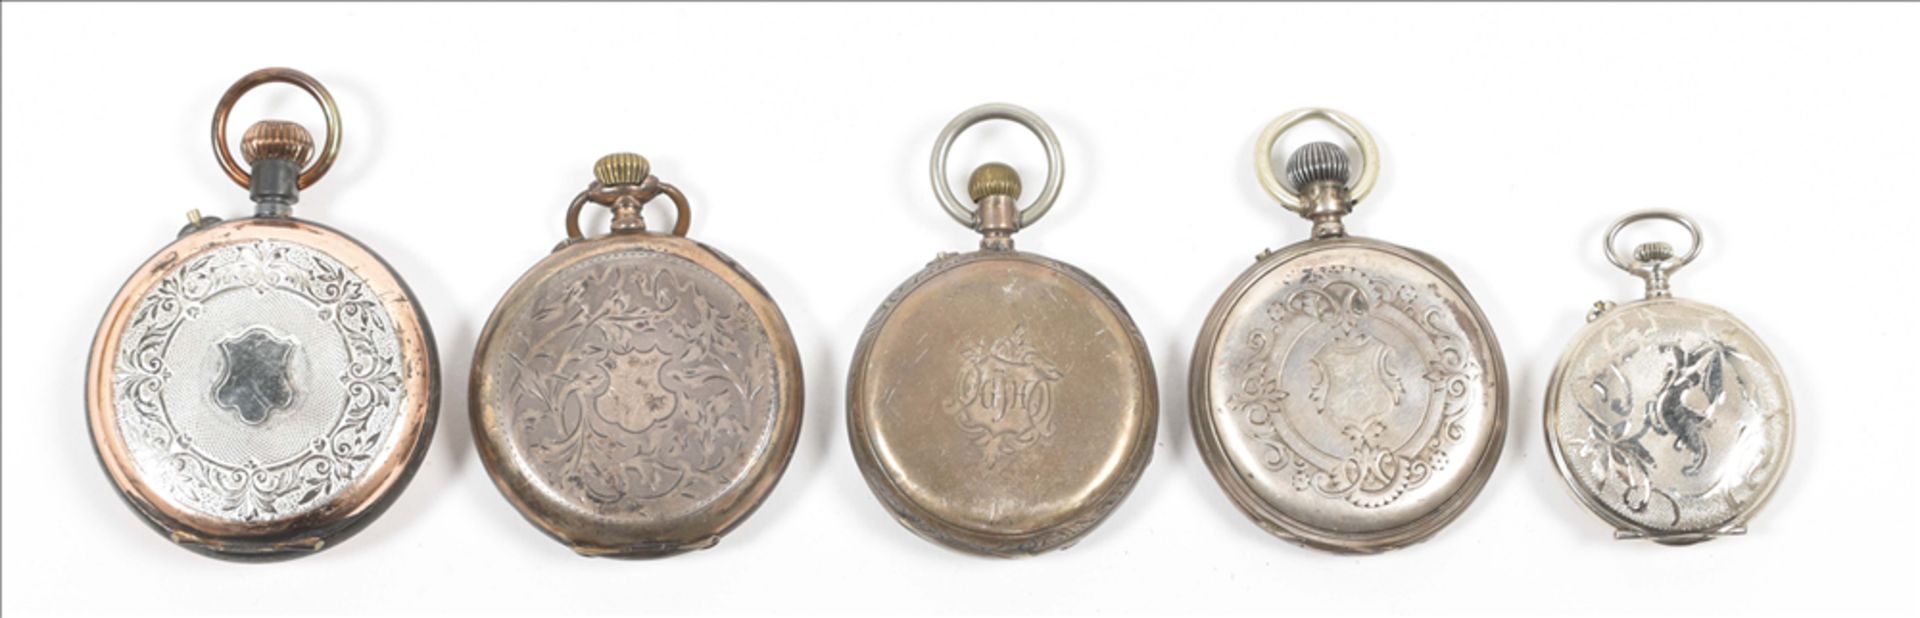 Five silver pocket watches - Image 4 of 7